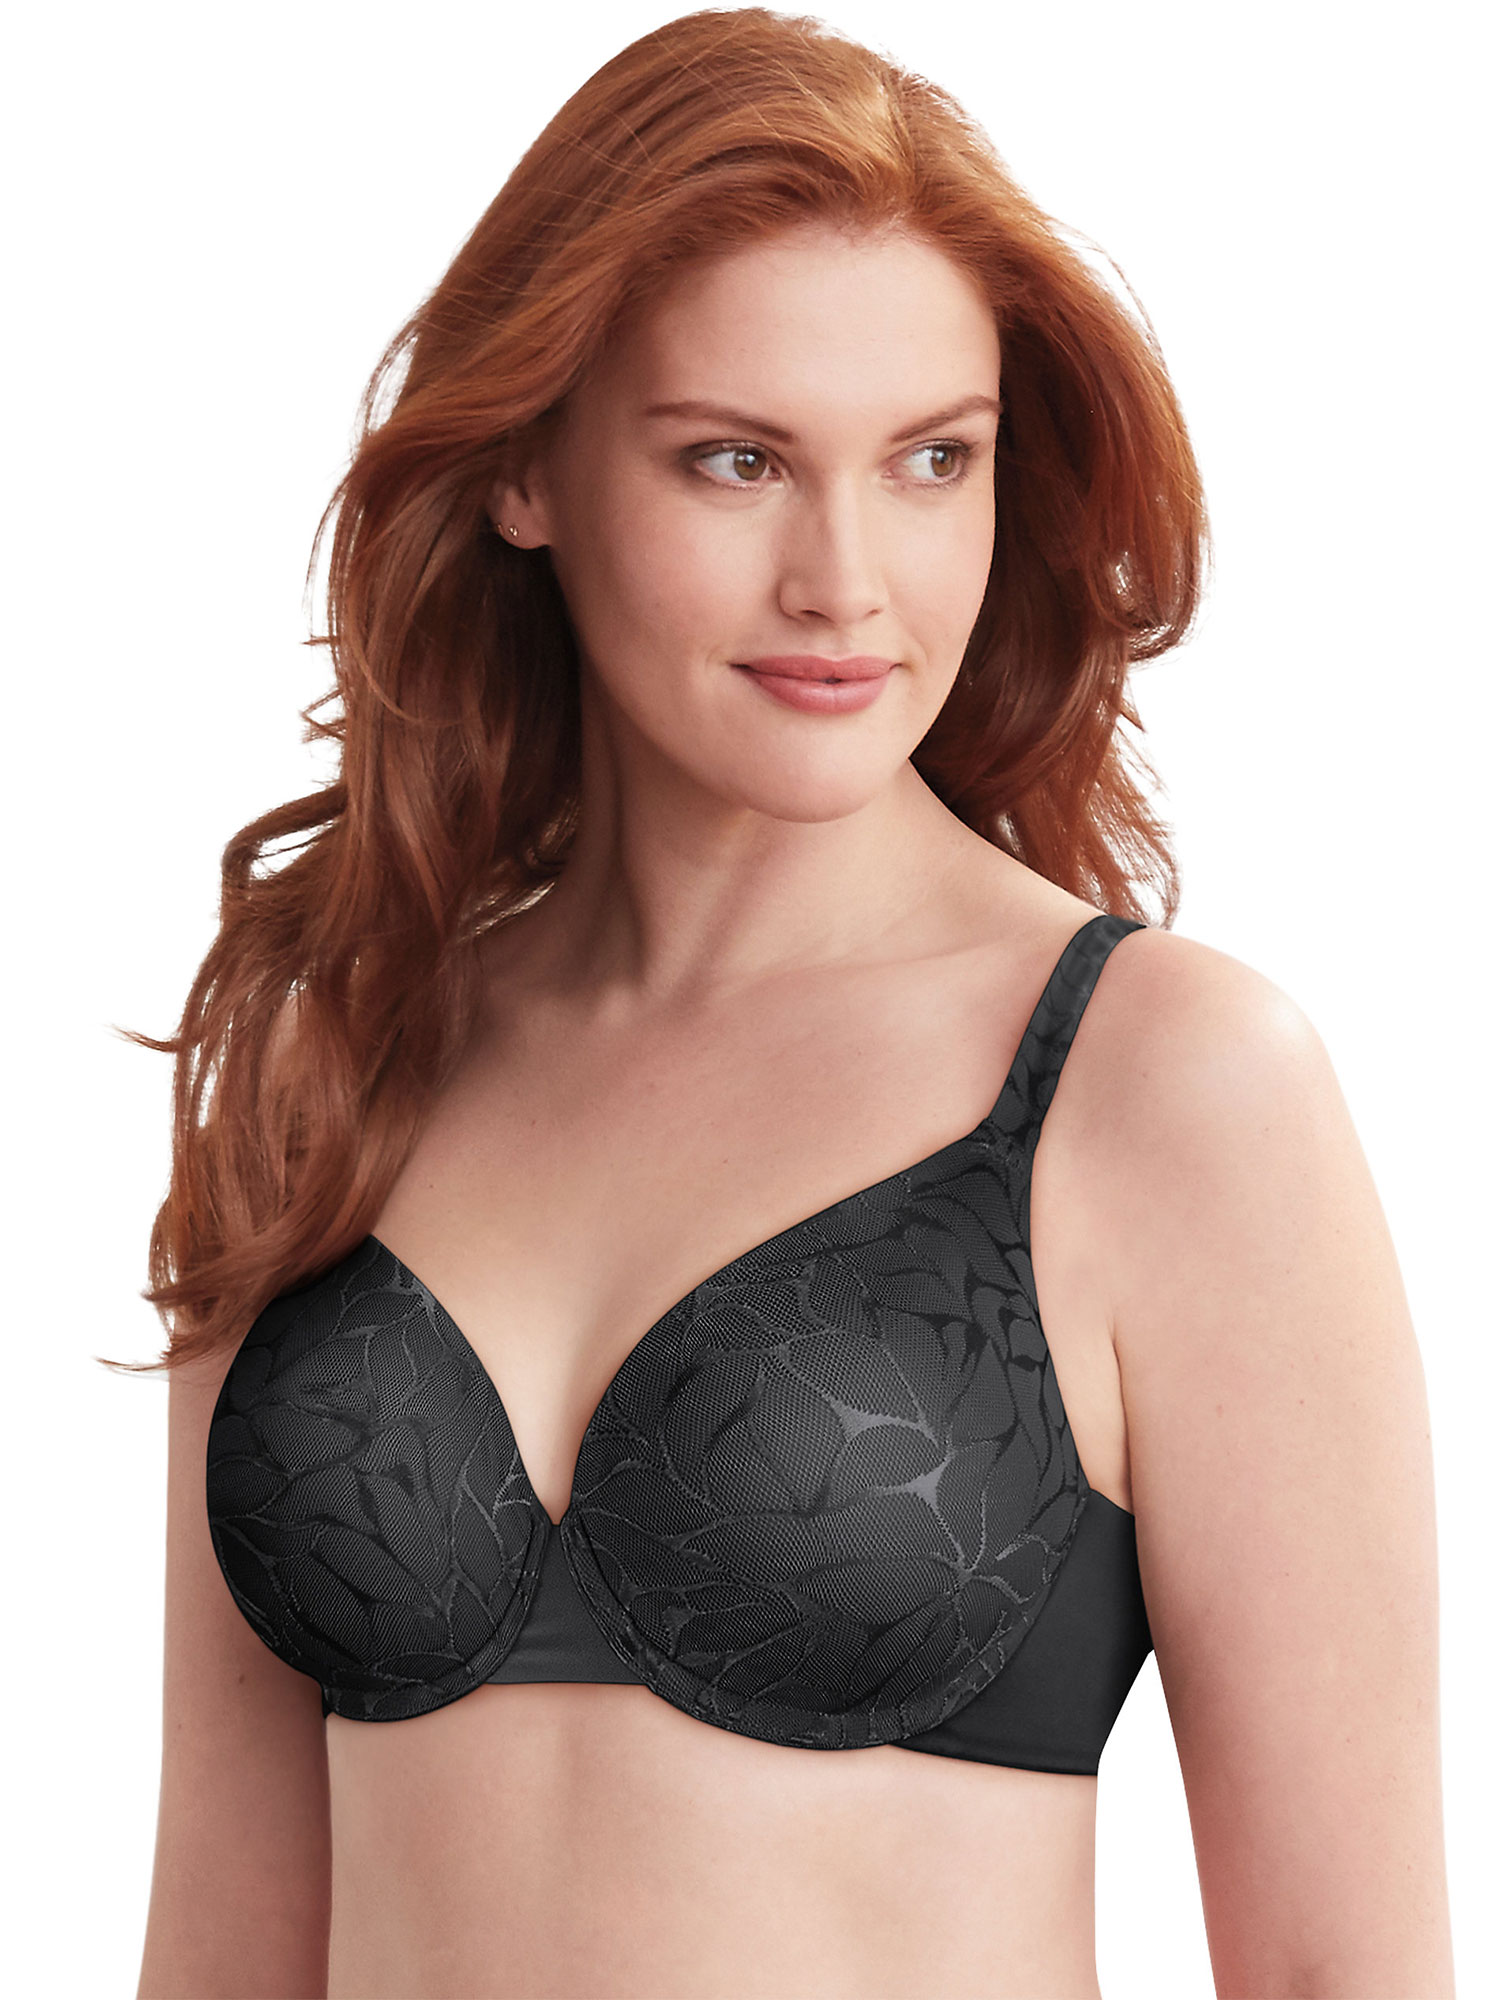 Bali Beauty Lift® Invisible Support Underwire Bra Black Lace 36D Women's - image 1 of 2